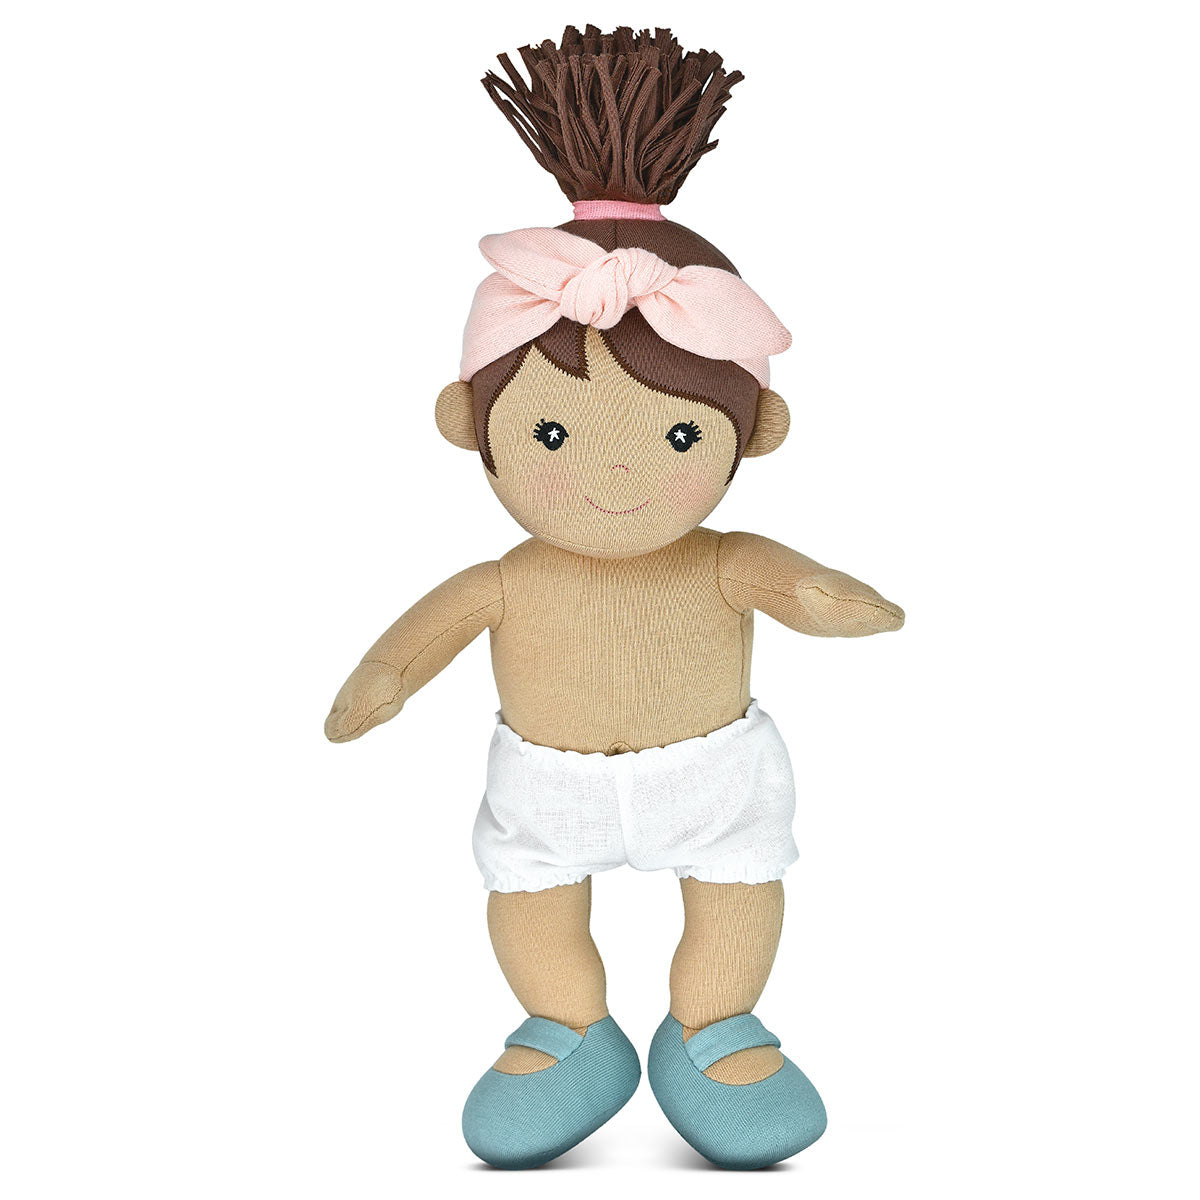 Apple Park soft toy doll - angus and dudley